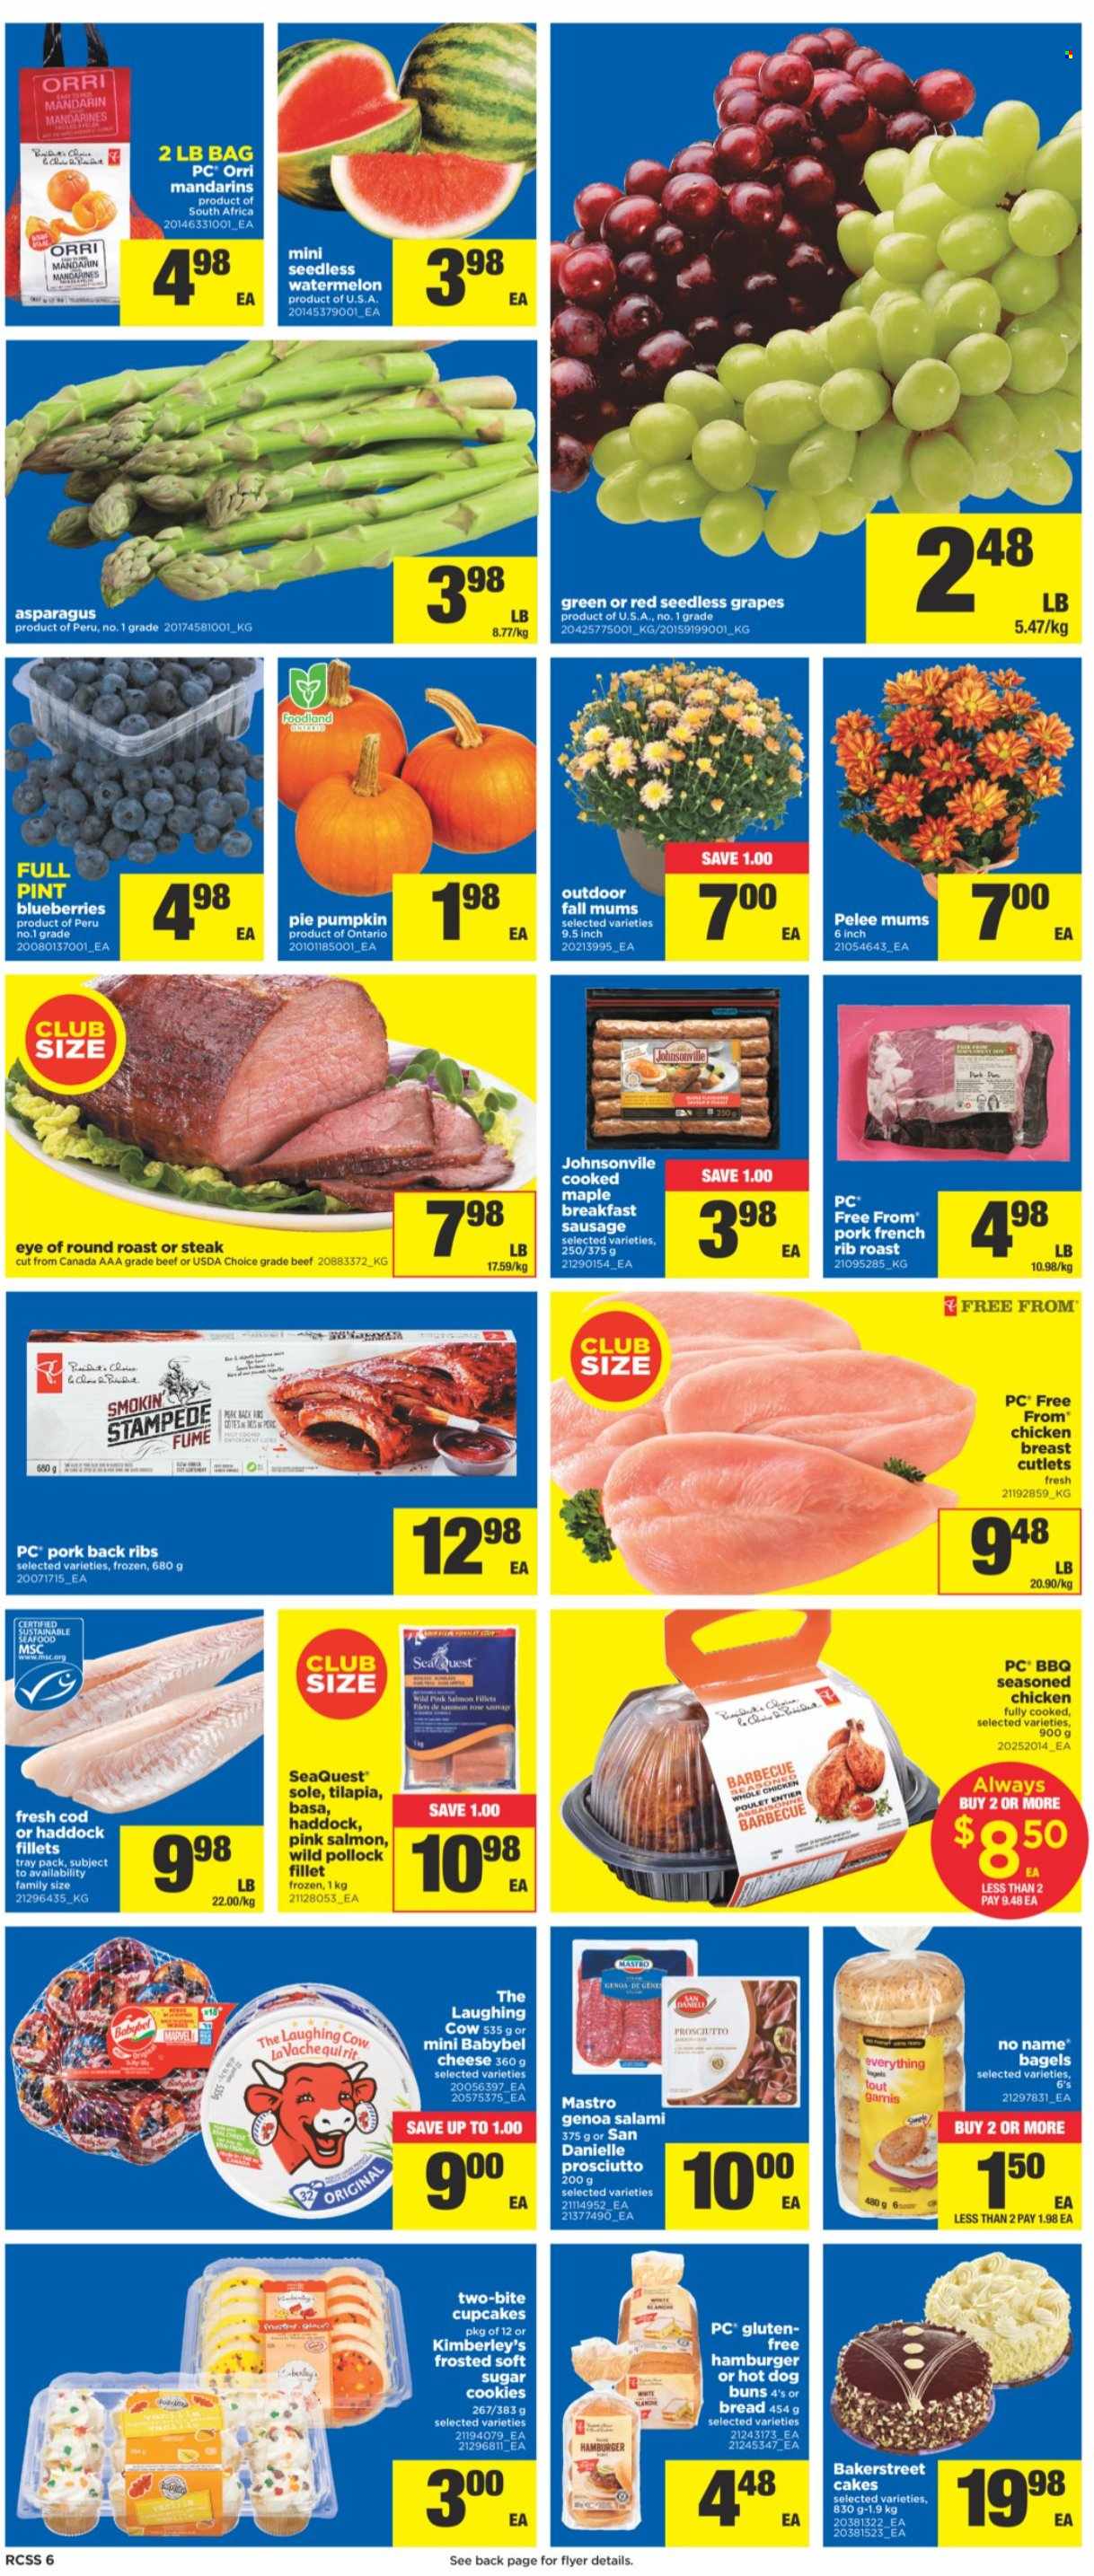 thumbnail - Real Canadian Superstore Flyer - September 30, 2021 - October 06, 2021 - Sales products - bagels, bread, cake, pie, buns, cupcake, asparagus, pumpkin, blueberries, grapes, mandarines, seedless grapes, watermelon, cod, salmon, tilapia, haddock, pollock, No Name, salami, prosciutto, sausage, cheese, The Laughing Cow, Babybel, cookies, wine, rosé wine, chicken breasts, chicken, beef meat, eye of round, round roast, pork meat, pork ribs, pork back ribs, rose, steak. Page 6.